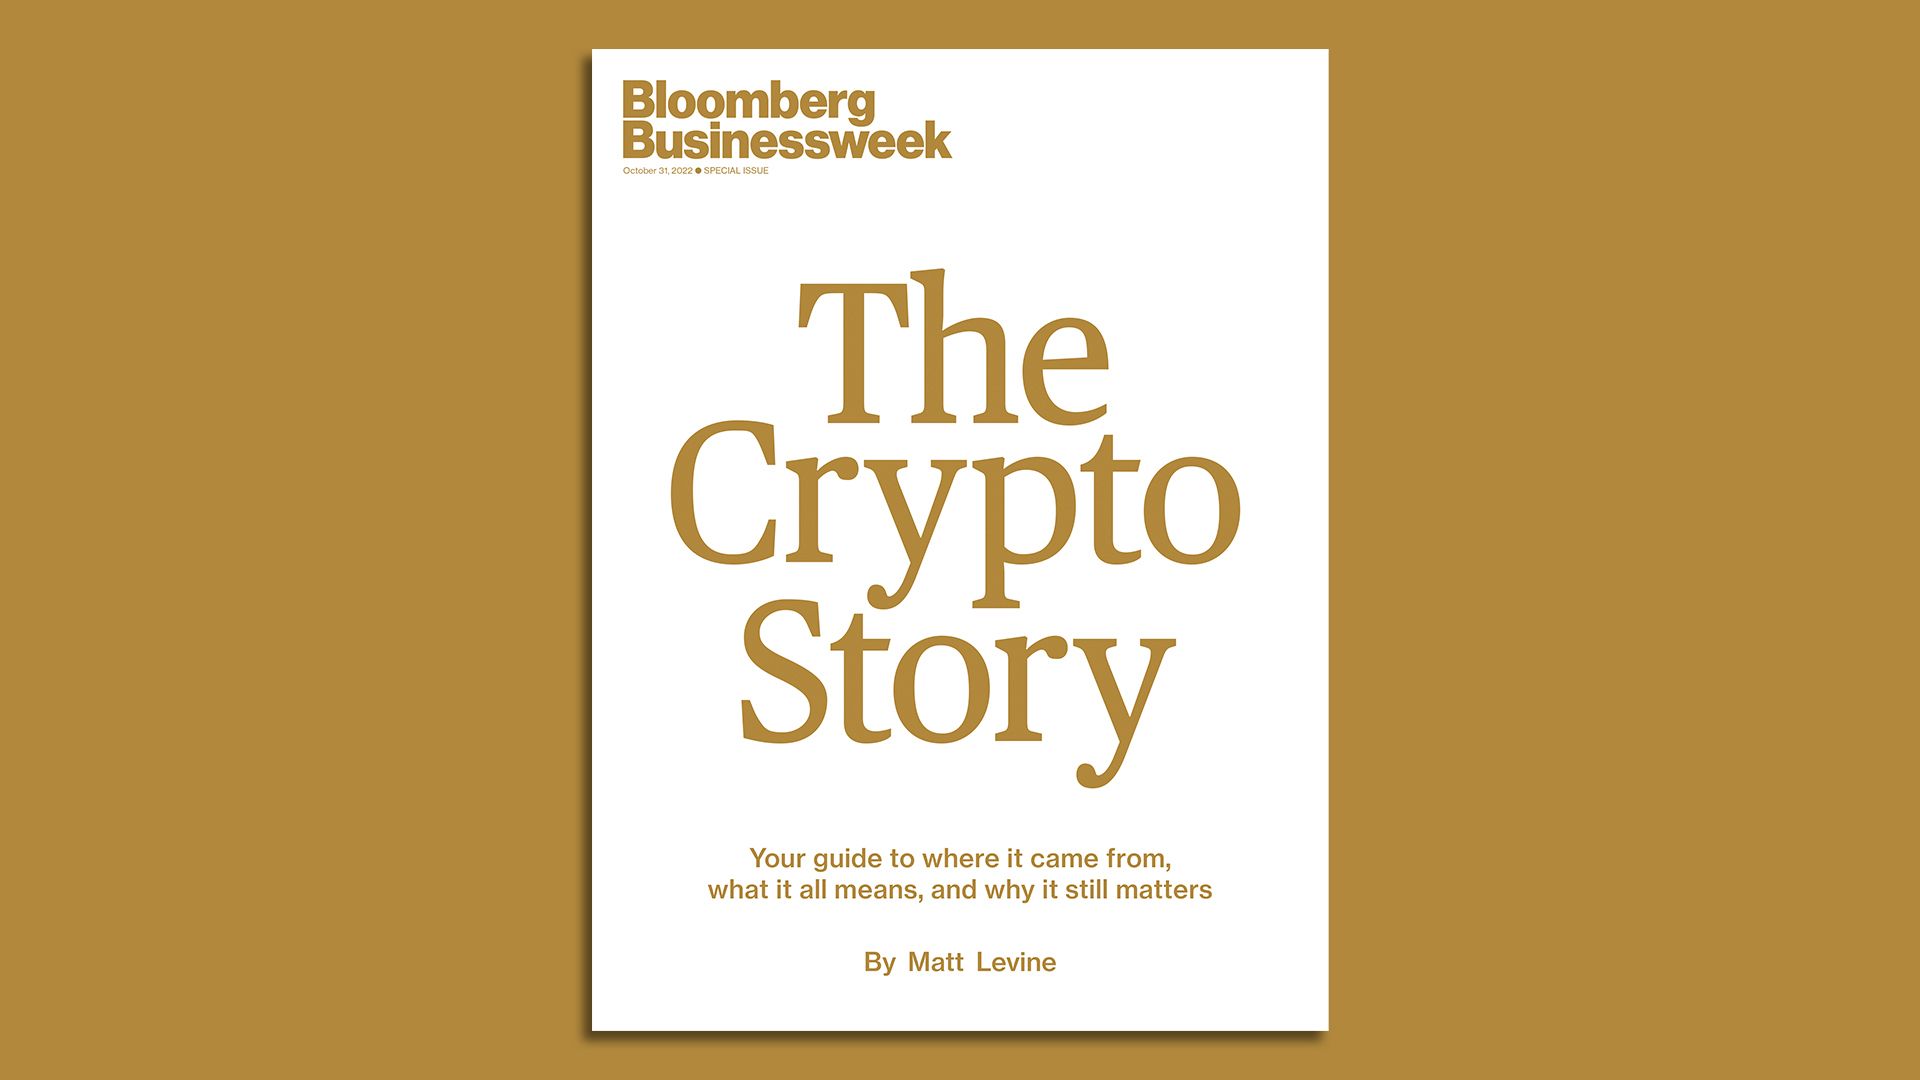 Image of the cover of Bloomberg Businessweek "The Crypto Story" by Matt Levine